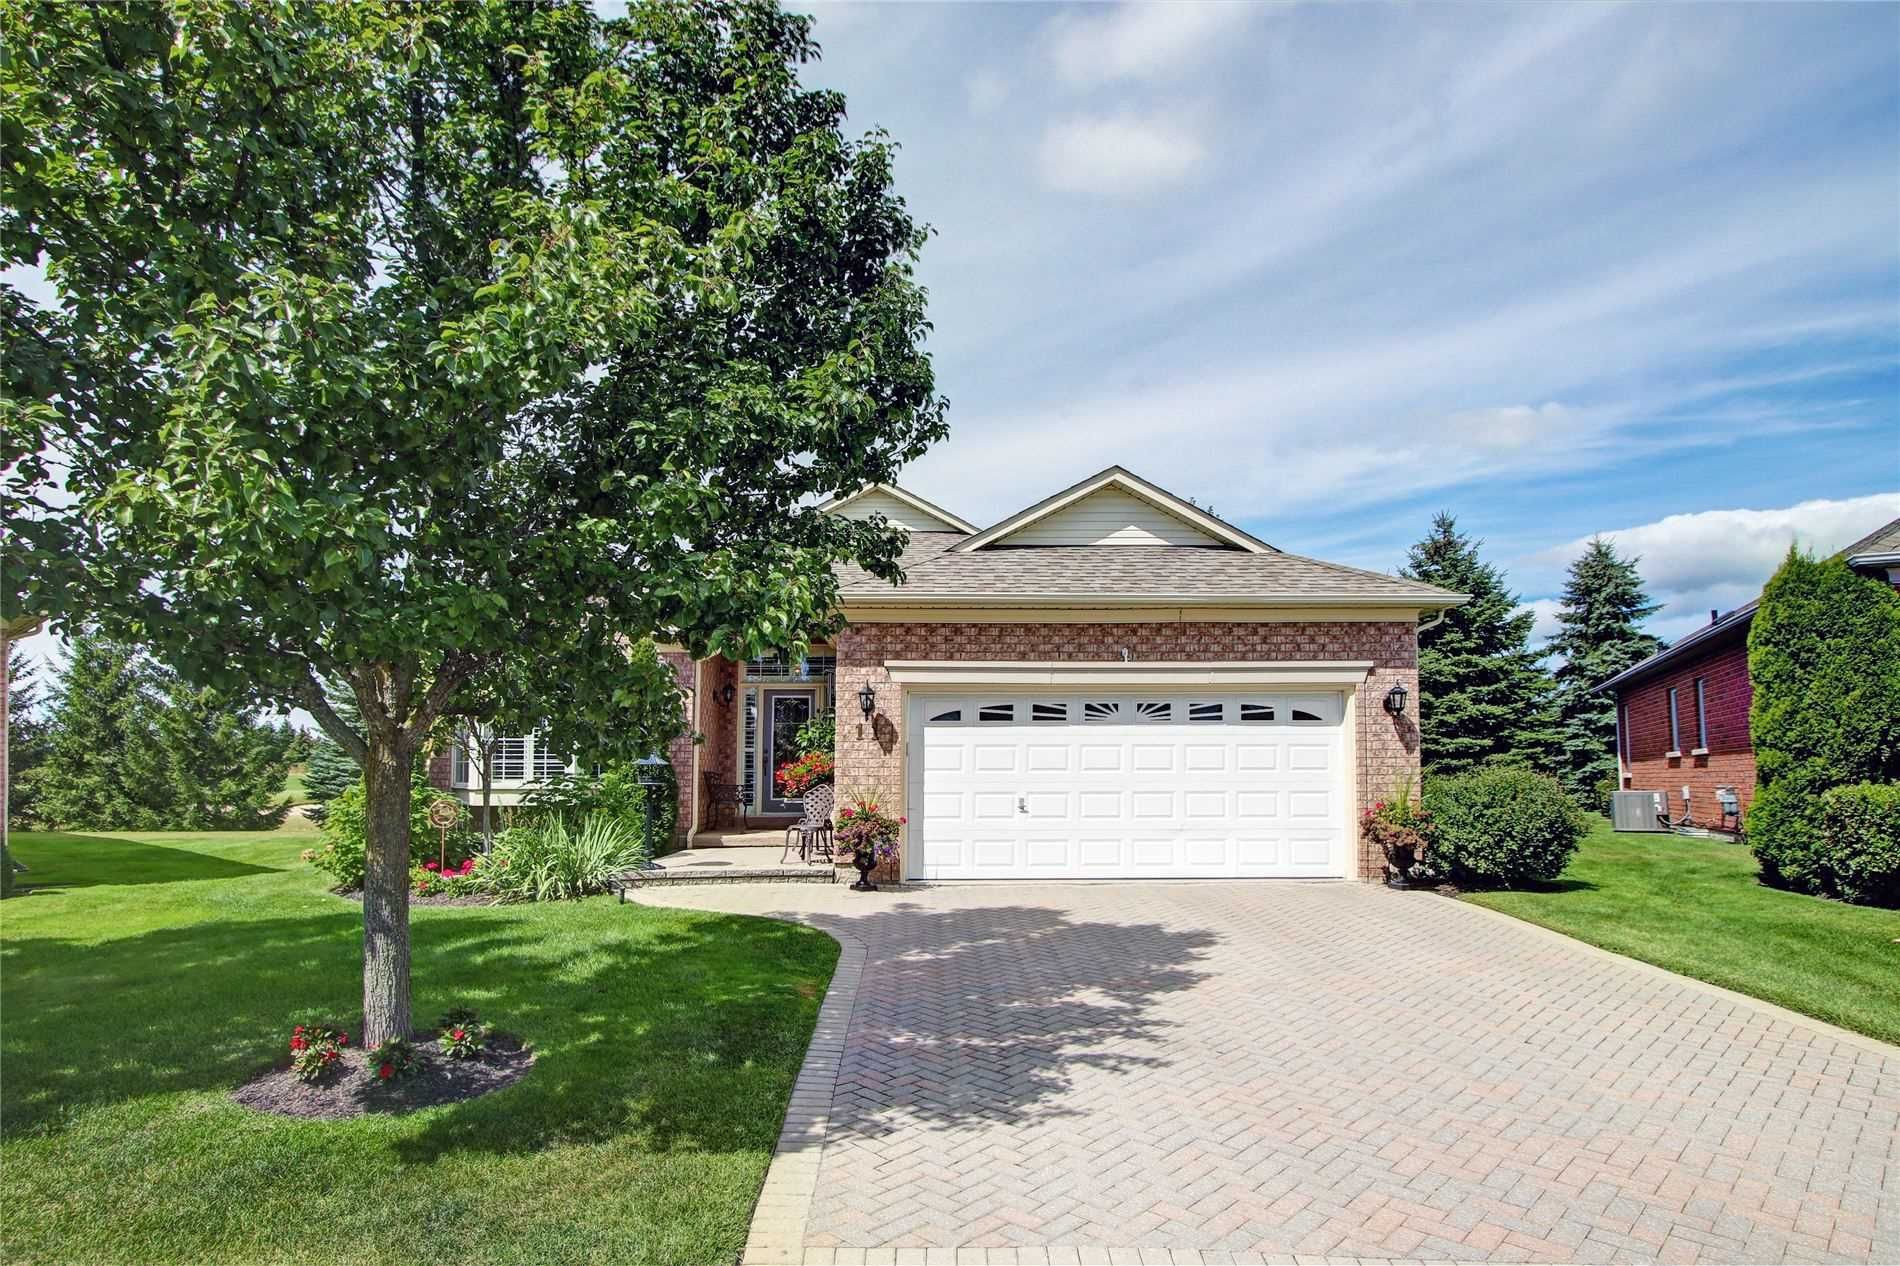 I have sold a property at 11 Jack's Round in Whitchurch-Stouffville
